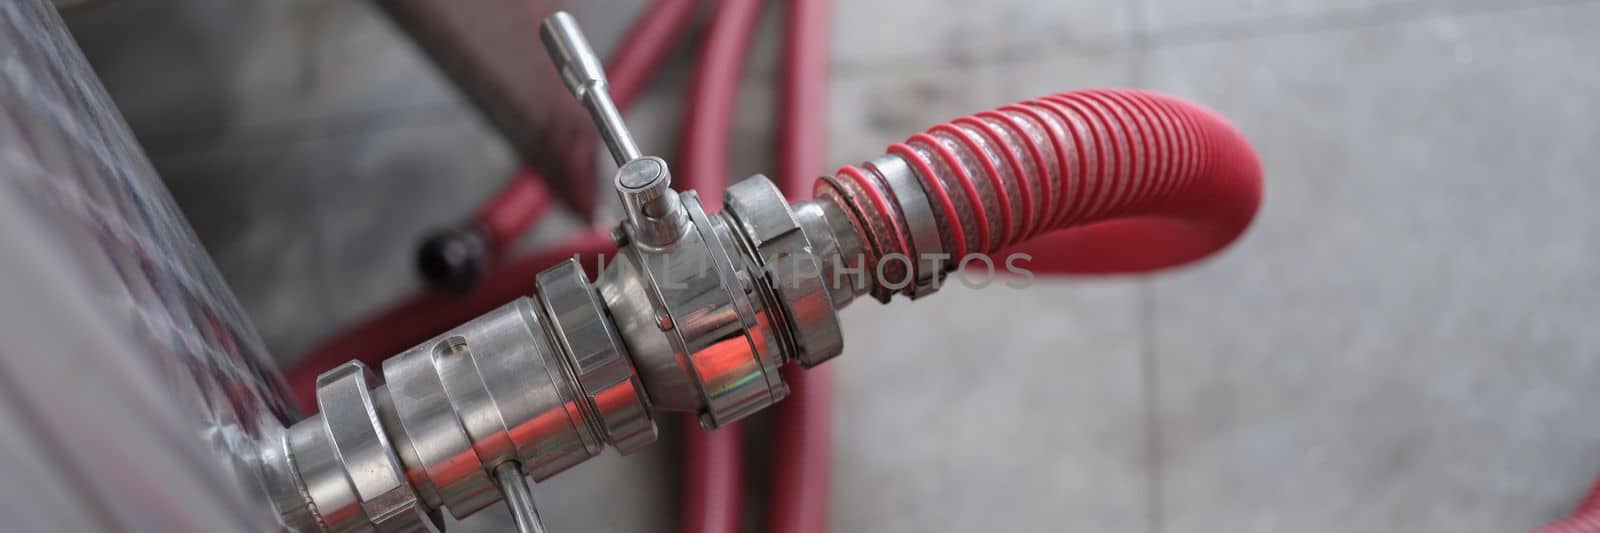 Industrial stainless steel pipe equipment with faucet and hose in wine production or chemical pharmaceutical production. Tank in pharmaceutical industry or chemical plant